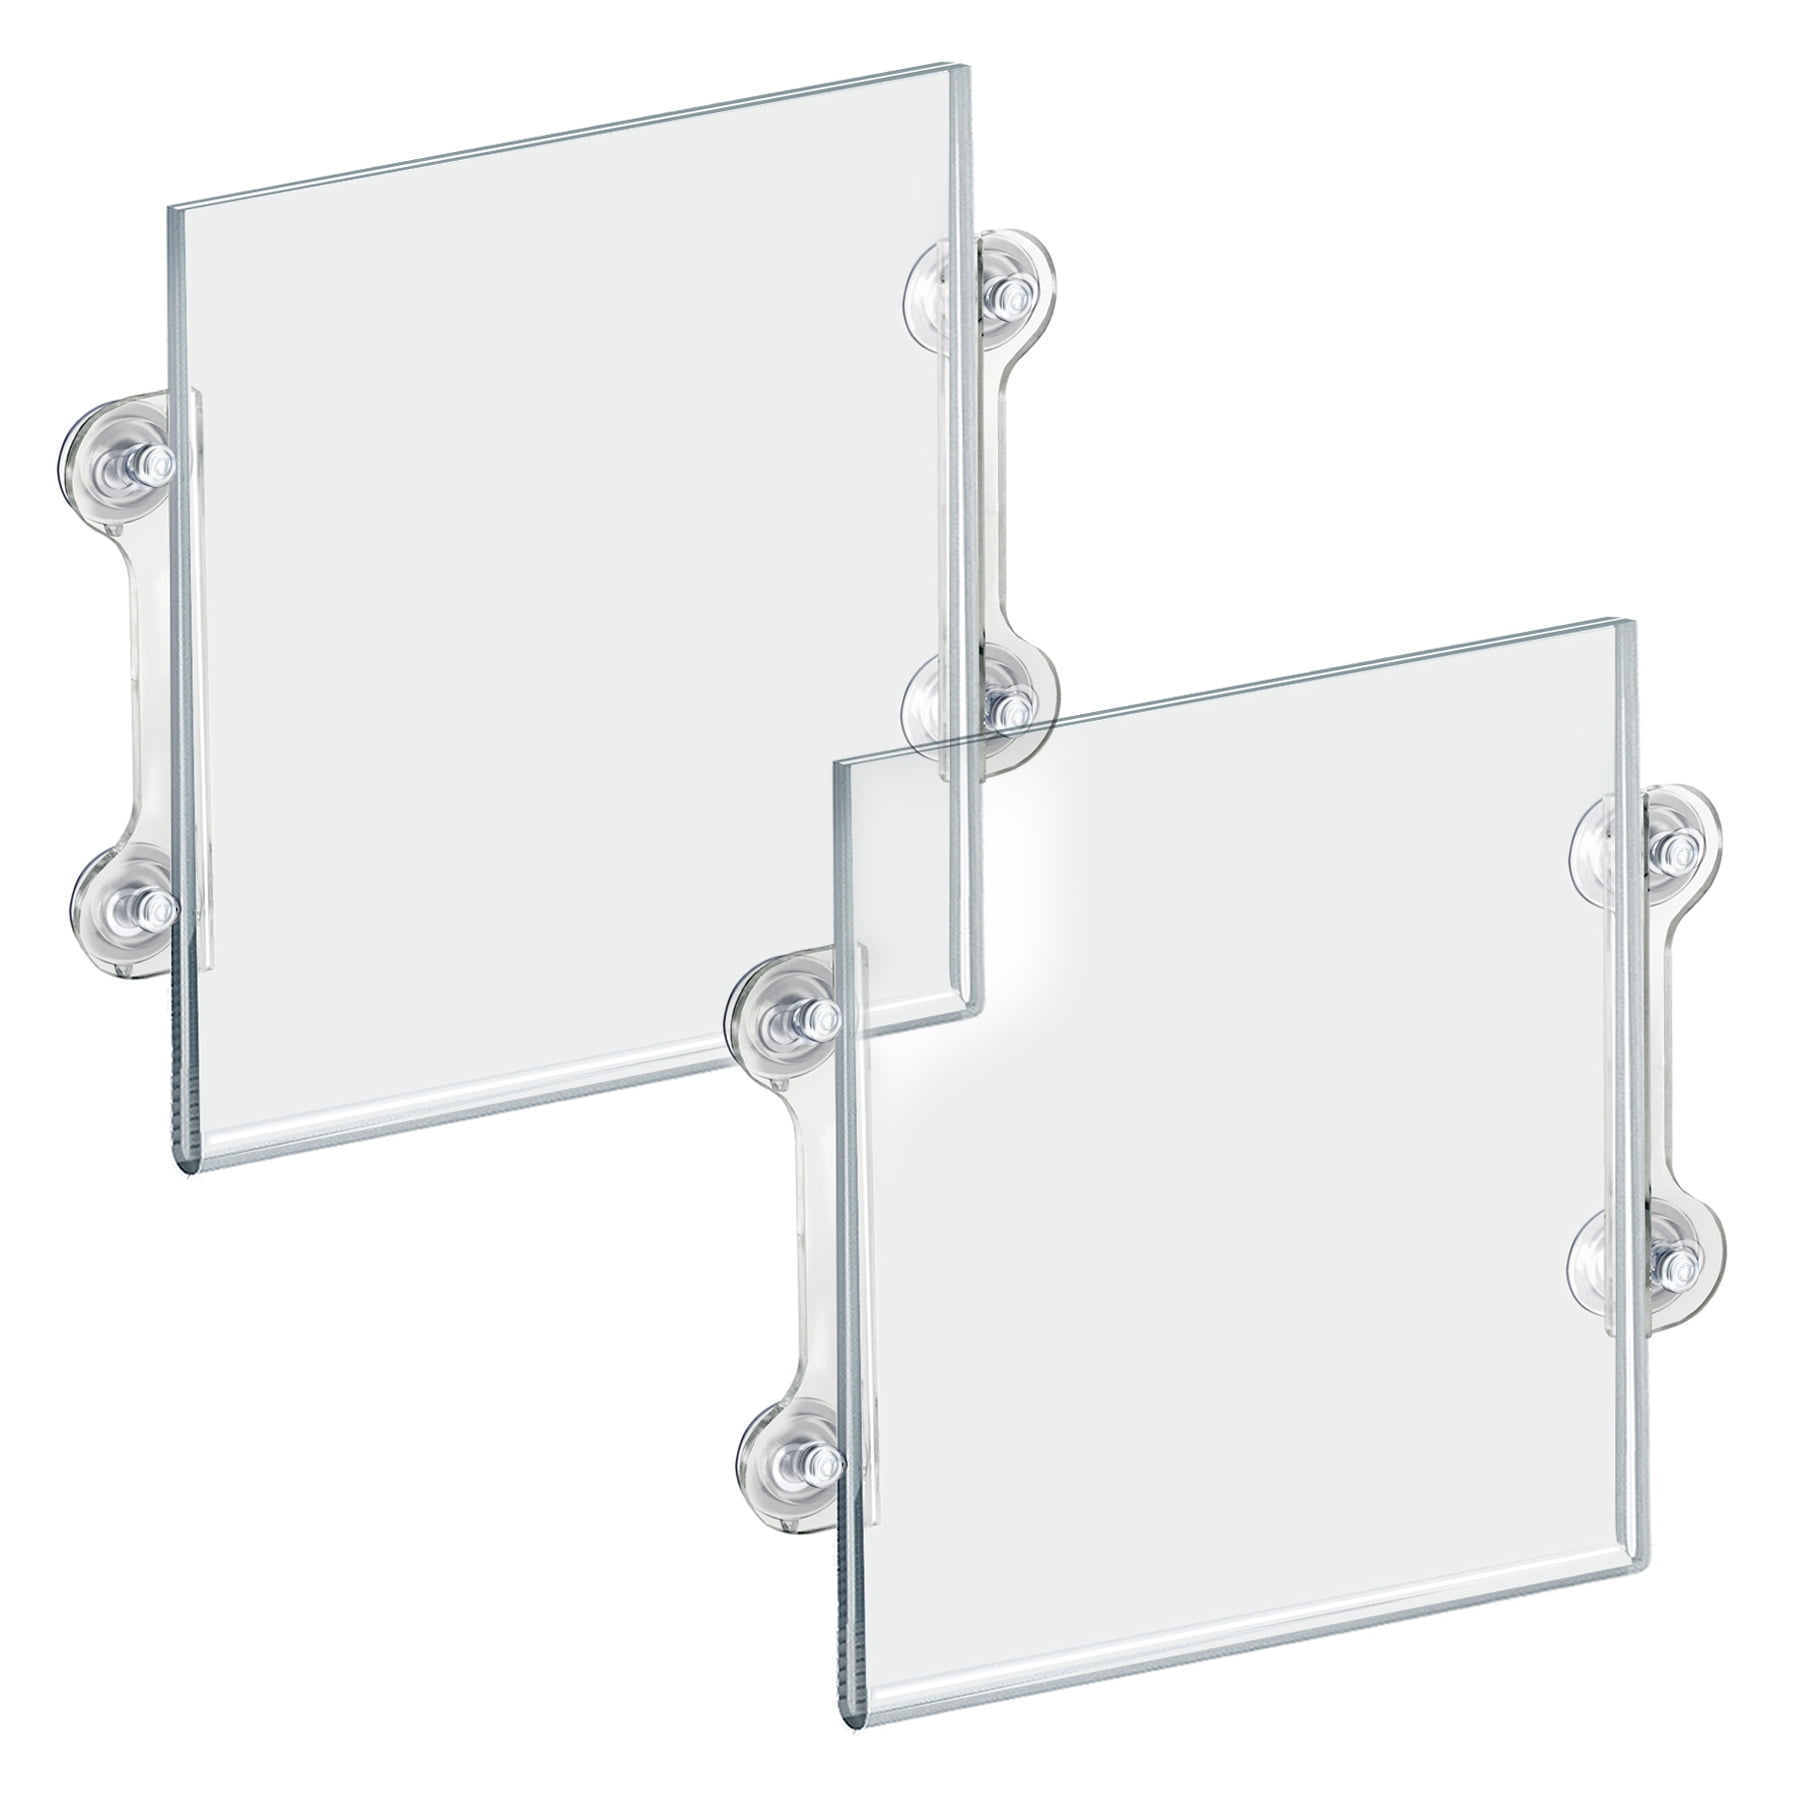 30 Packs 4 x 6 Inch Acrylic Sign Holder Clear Table Menu Display Stand  Acrylic Stands for Display Standing Menu Flyer Holder Double Sided Clear